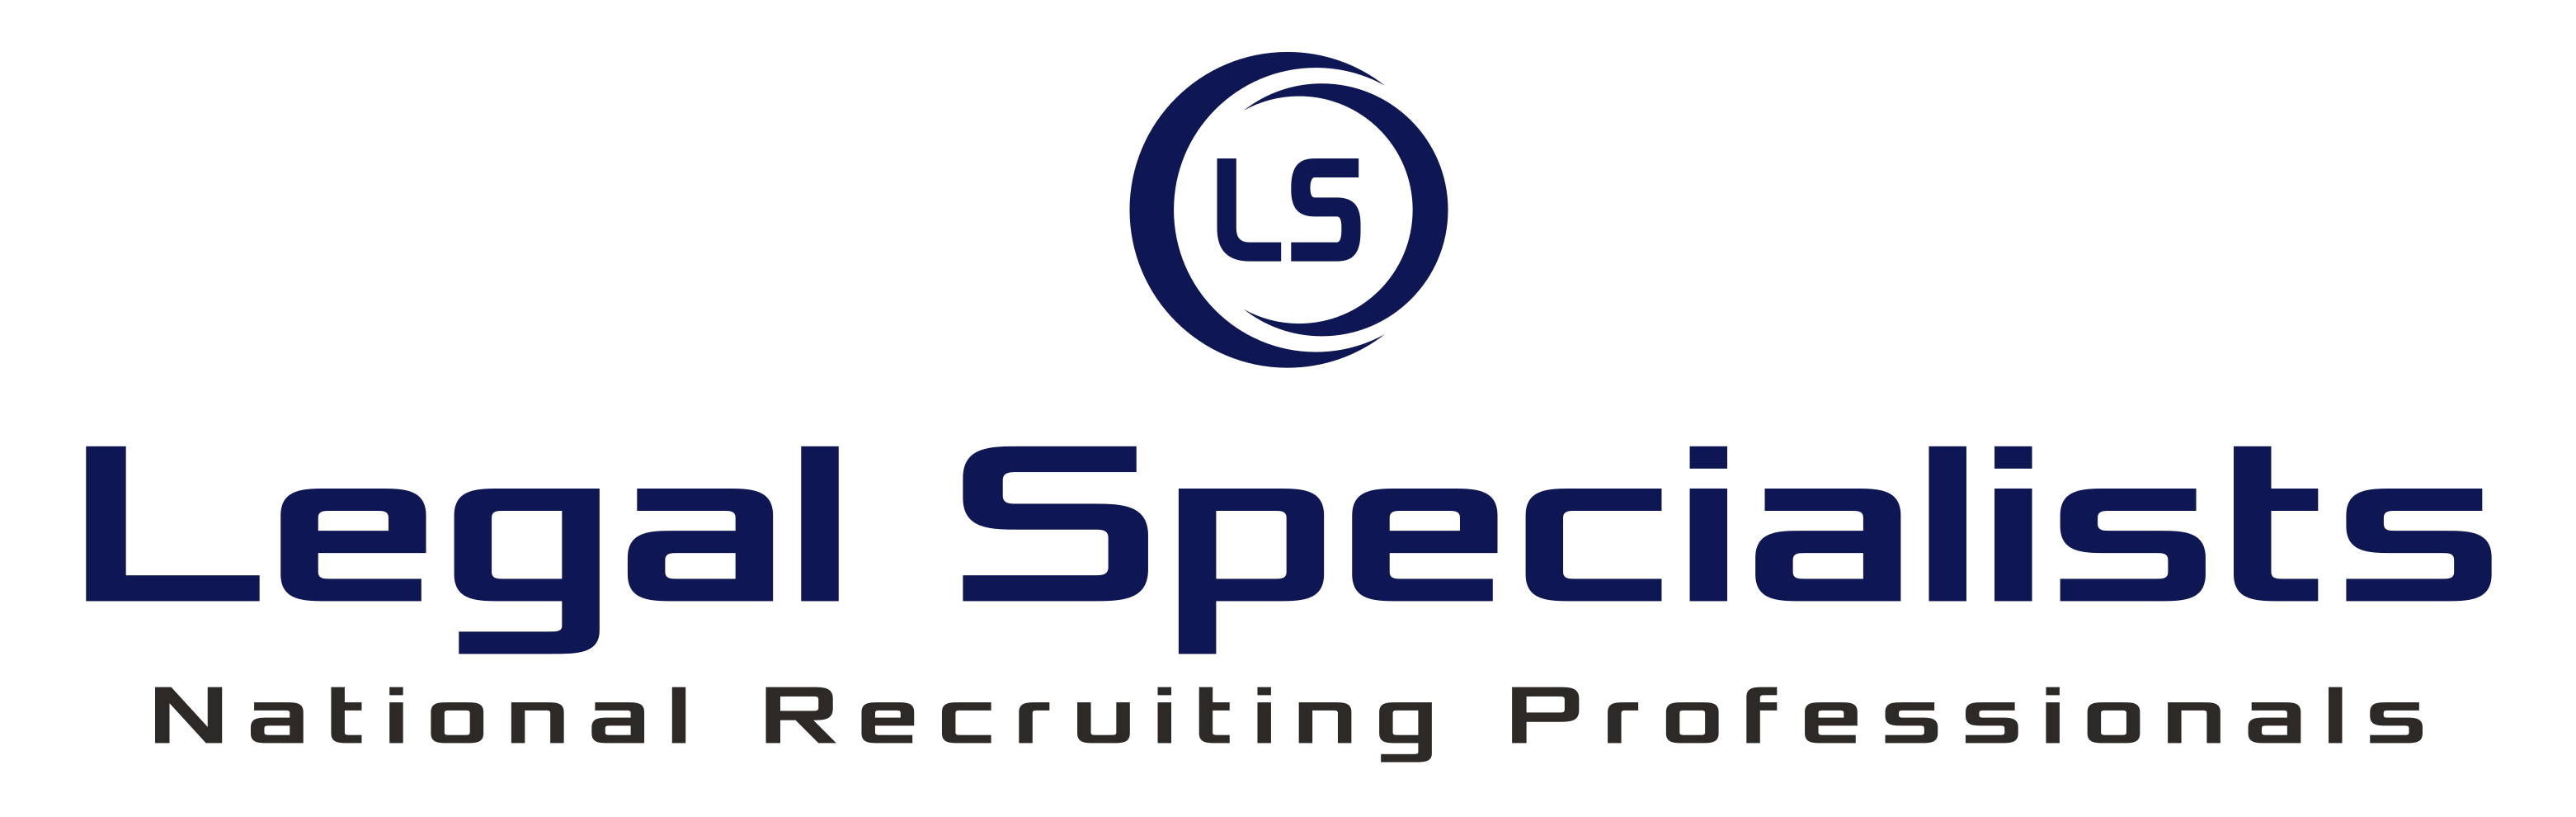 Legal Specialists - National Recruiting Professionals